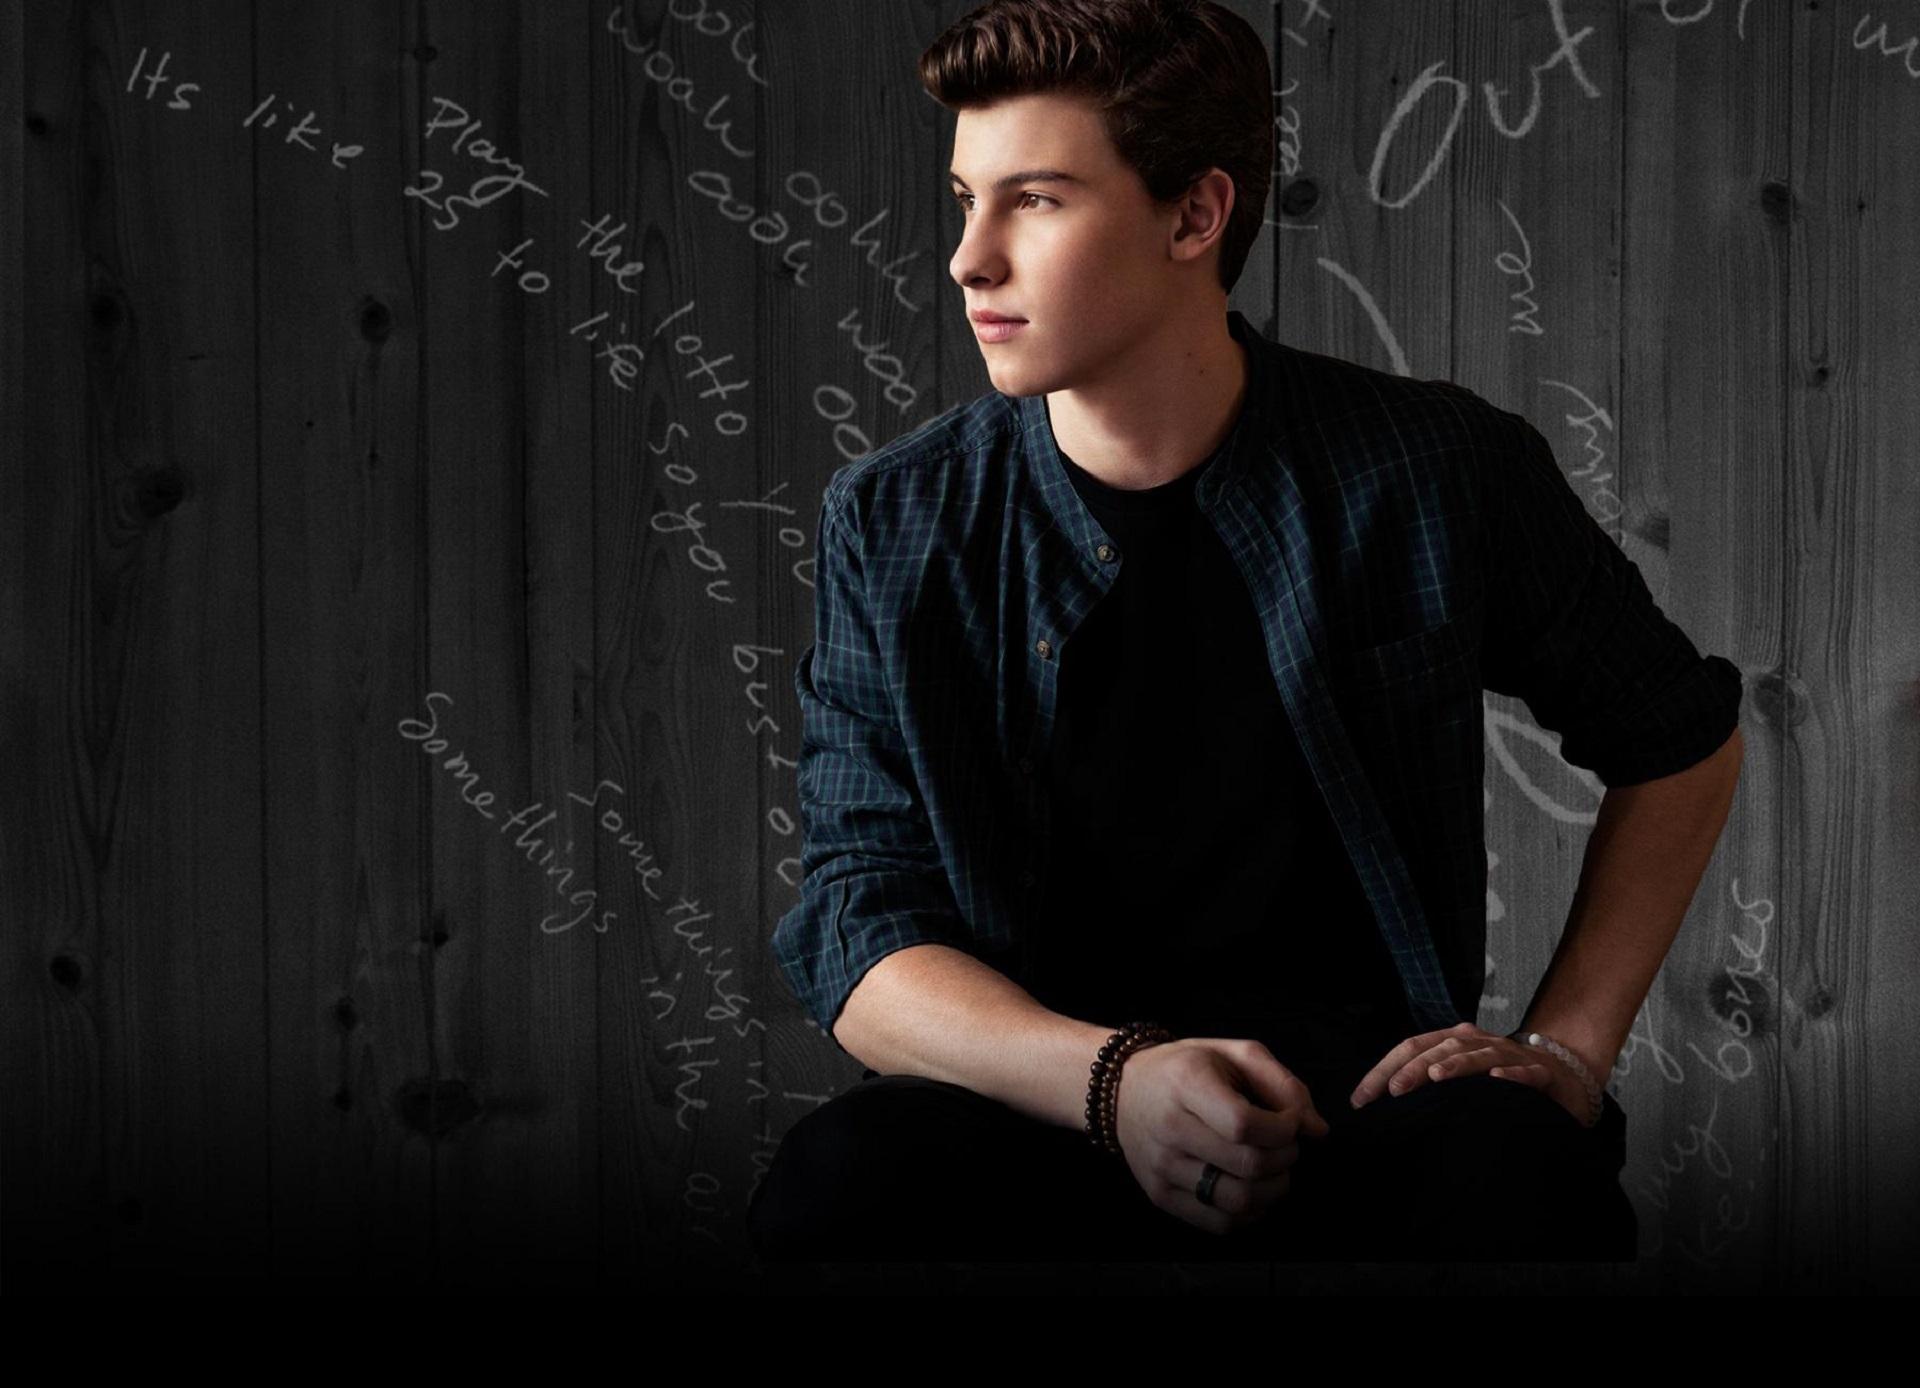 Shawn Mendes Wallpaper Image Photo Picture Background